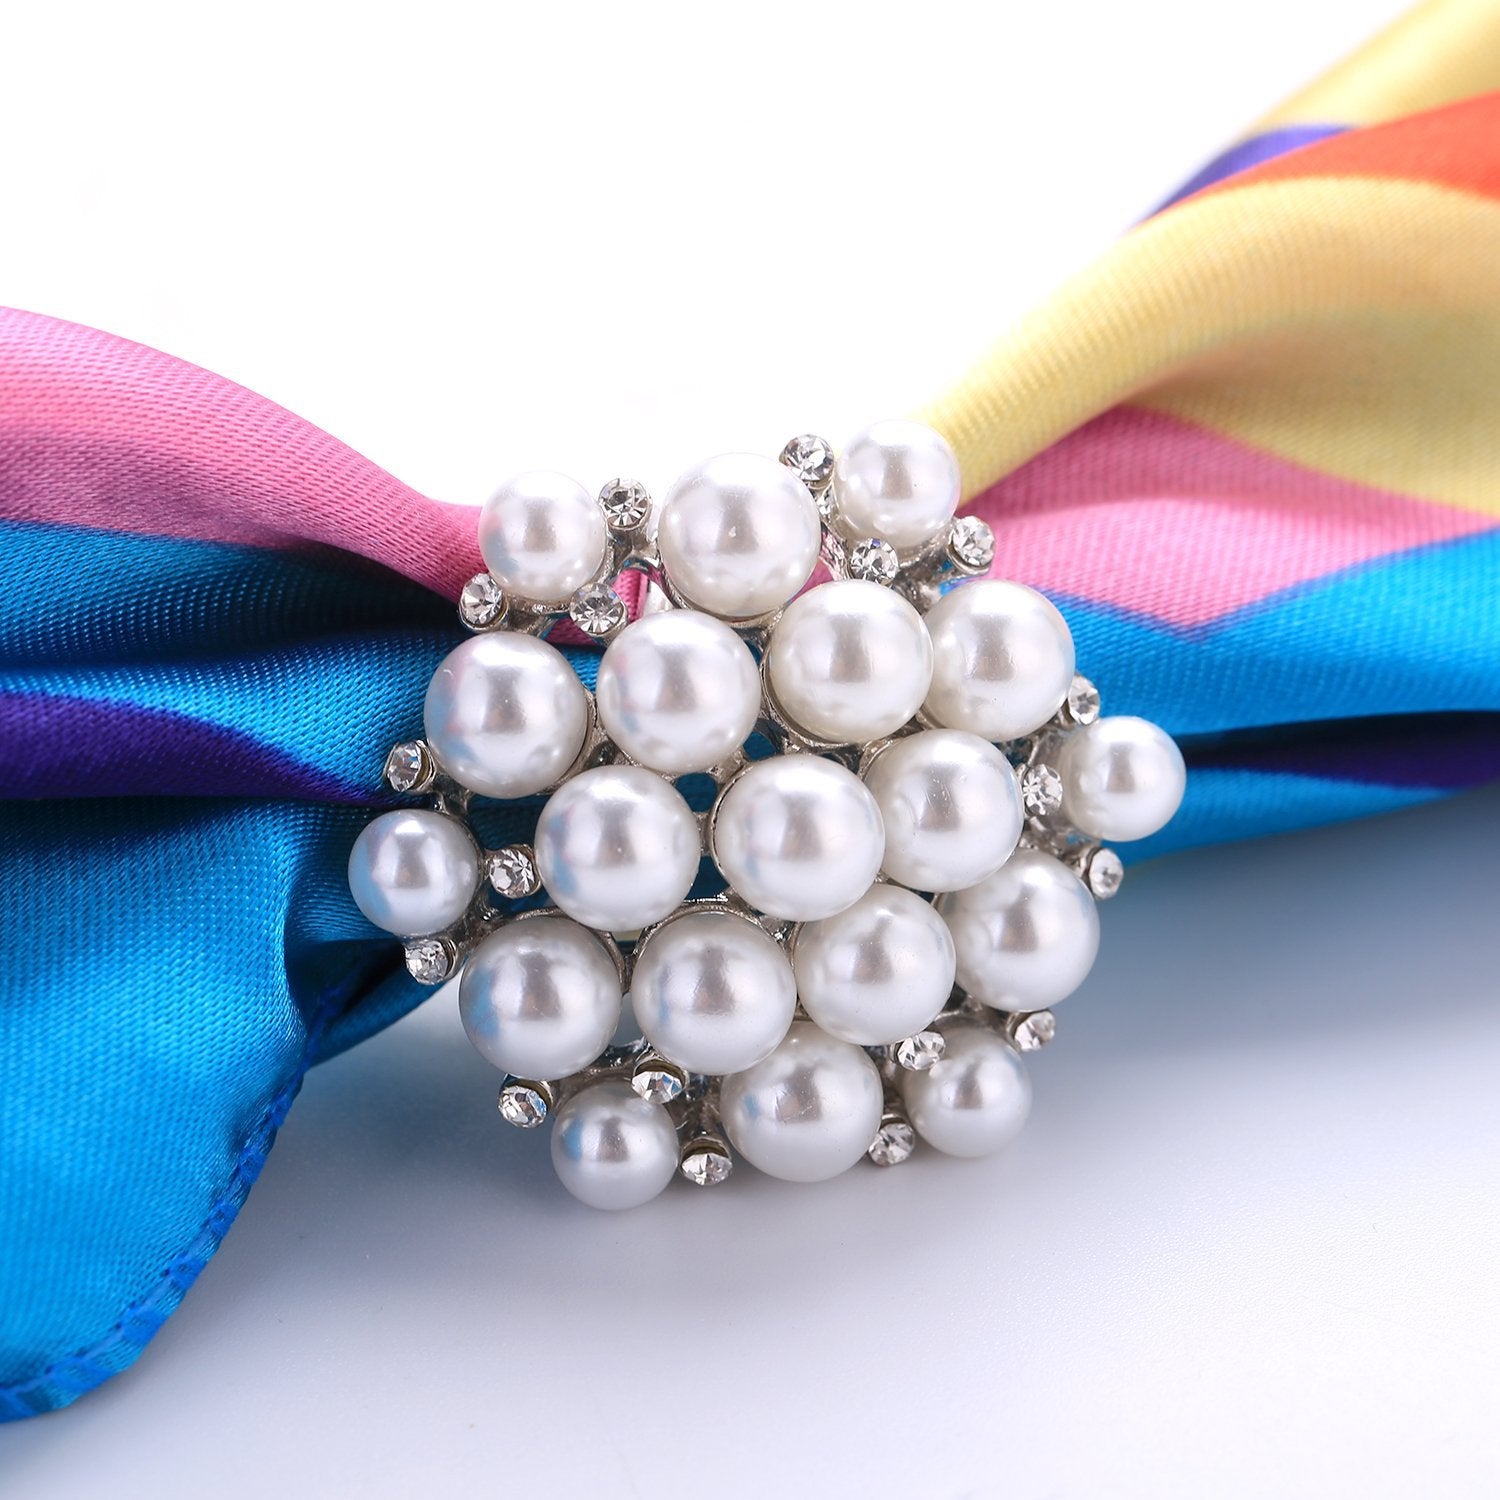 Women's Fashion Silk Scarf Buckle Silver Pearl and Crystal Clip Ring BUK004